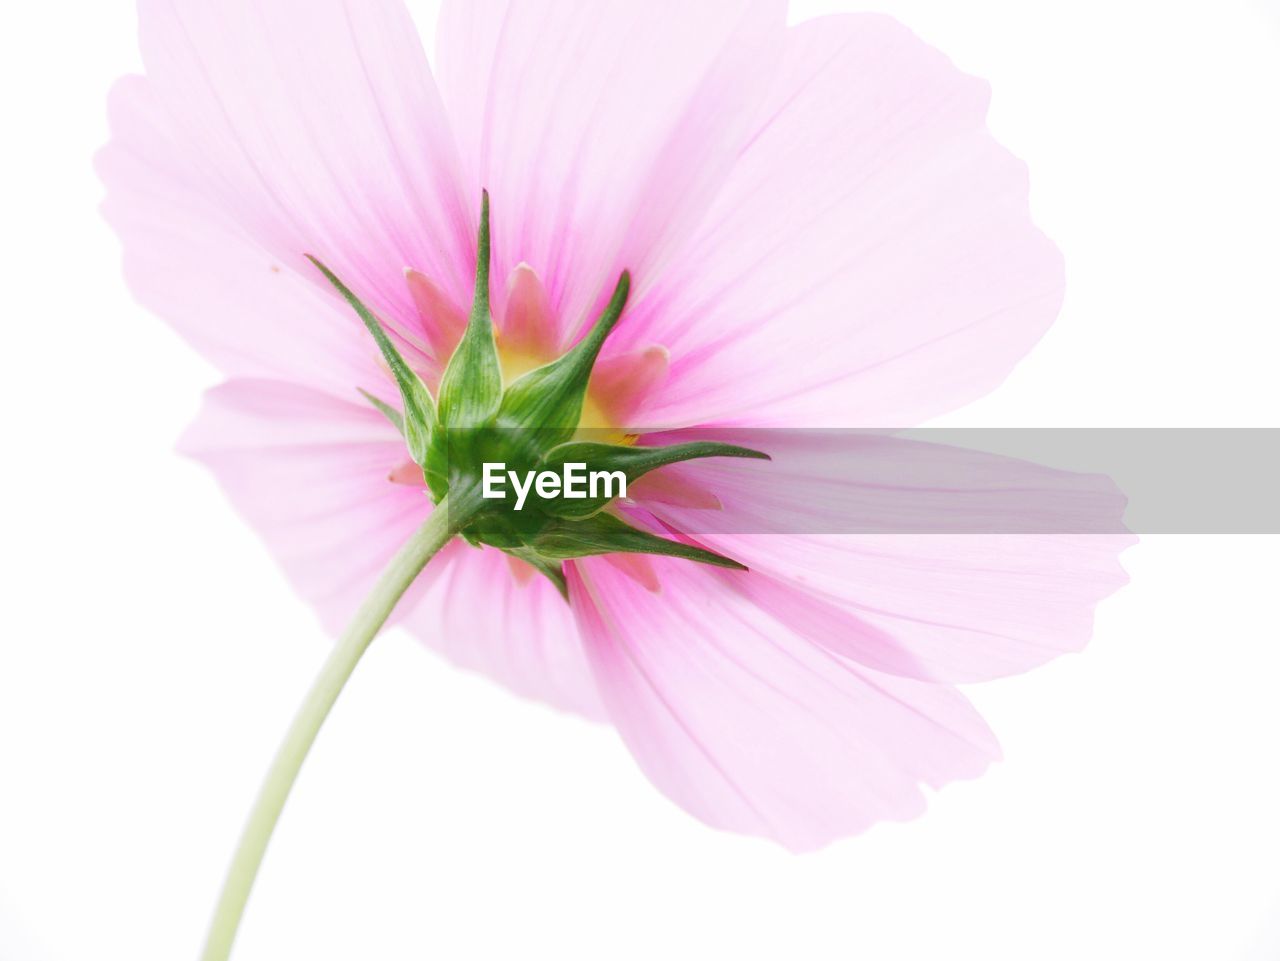 CLOSE-UP OF PINK COSMOS FLOWER